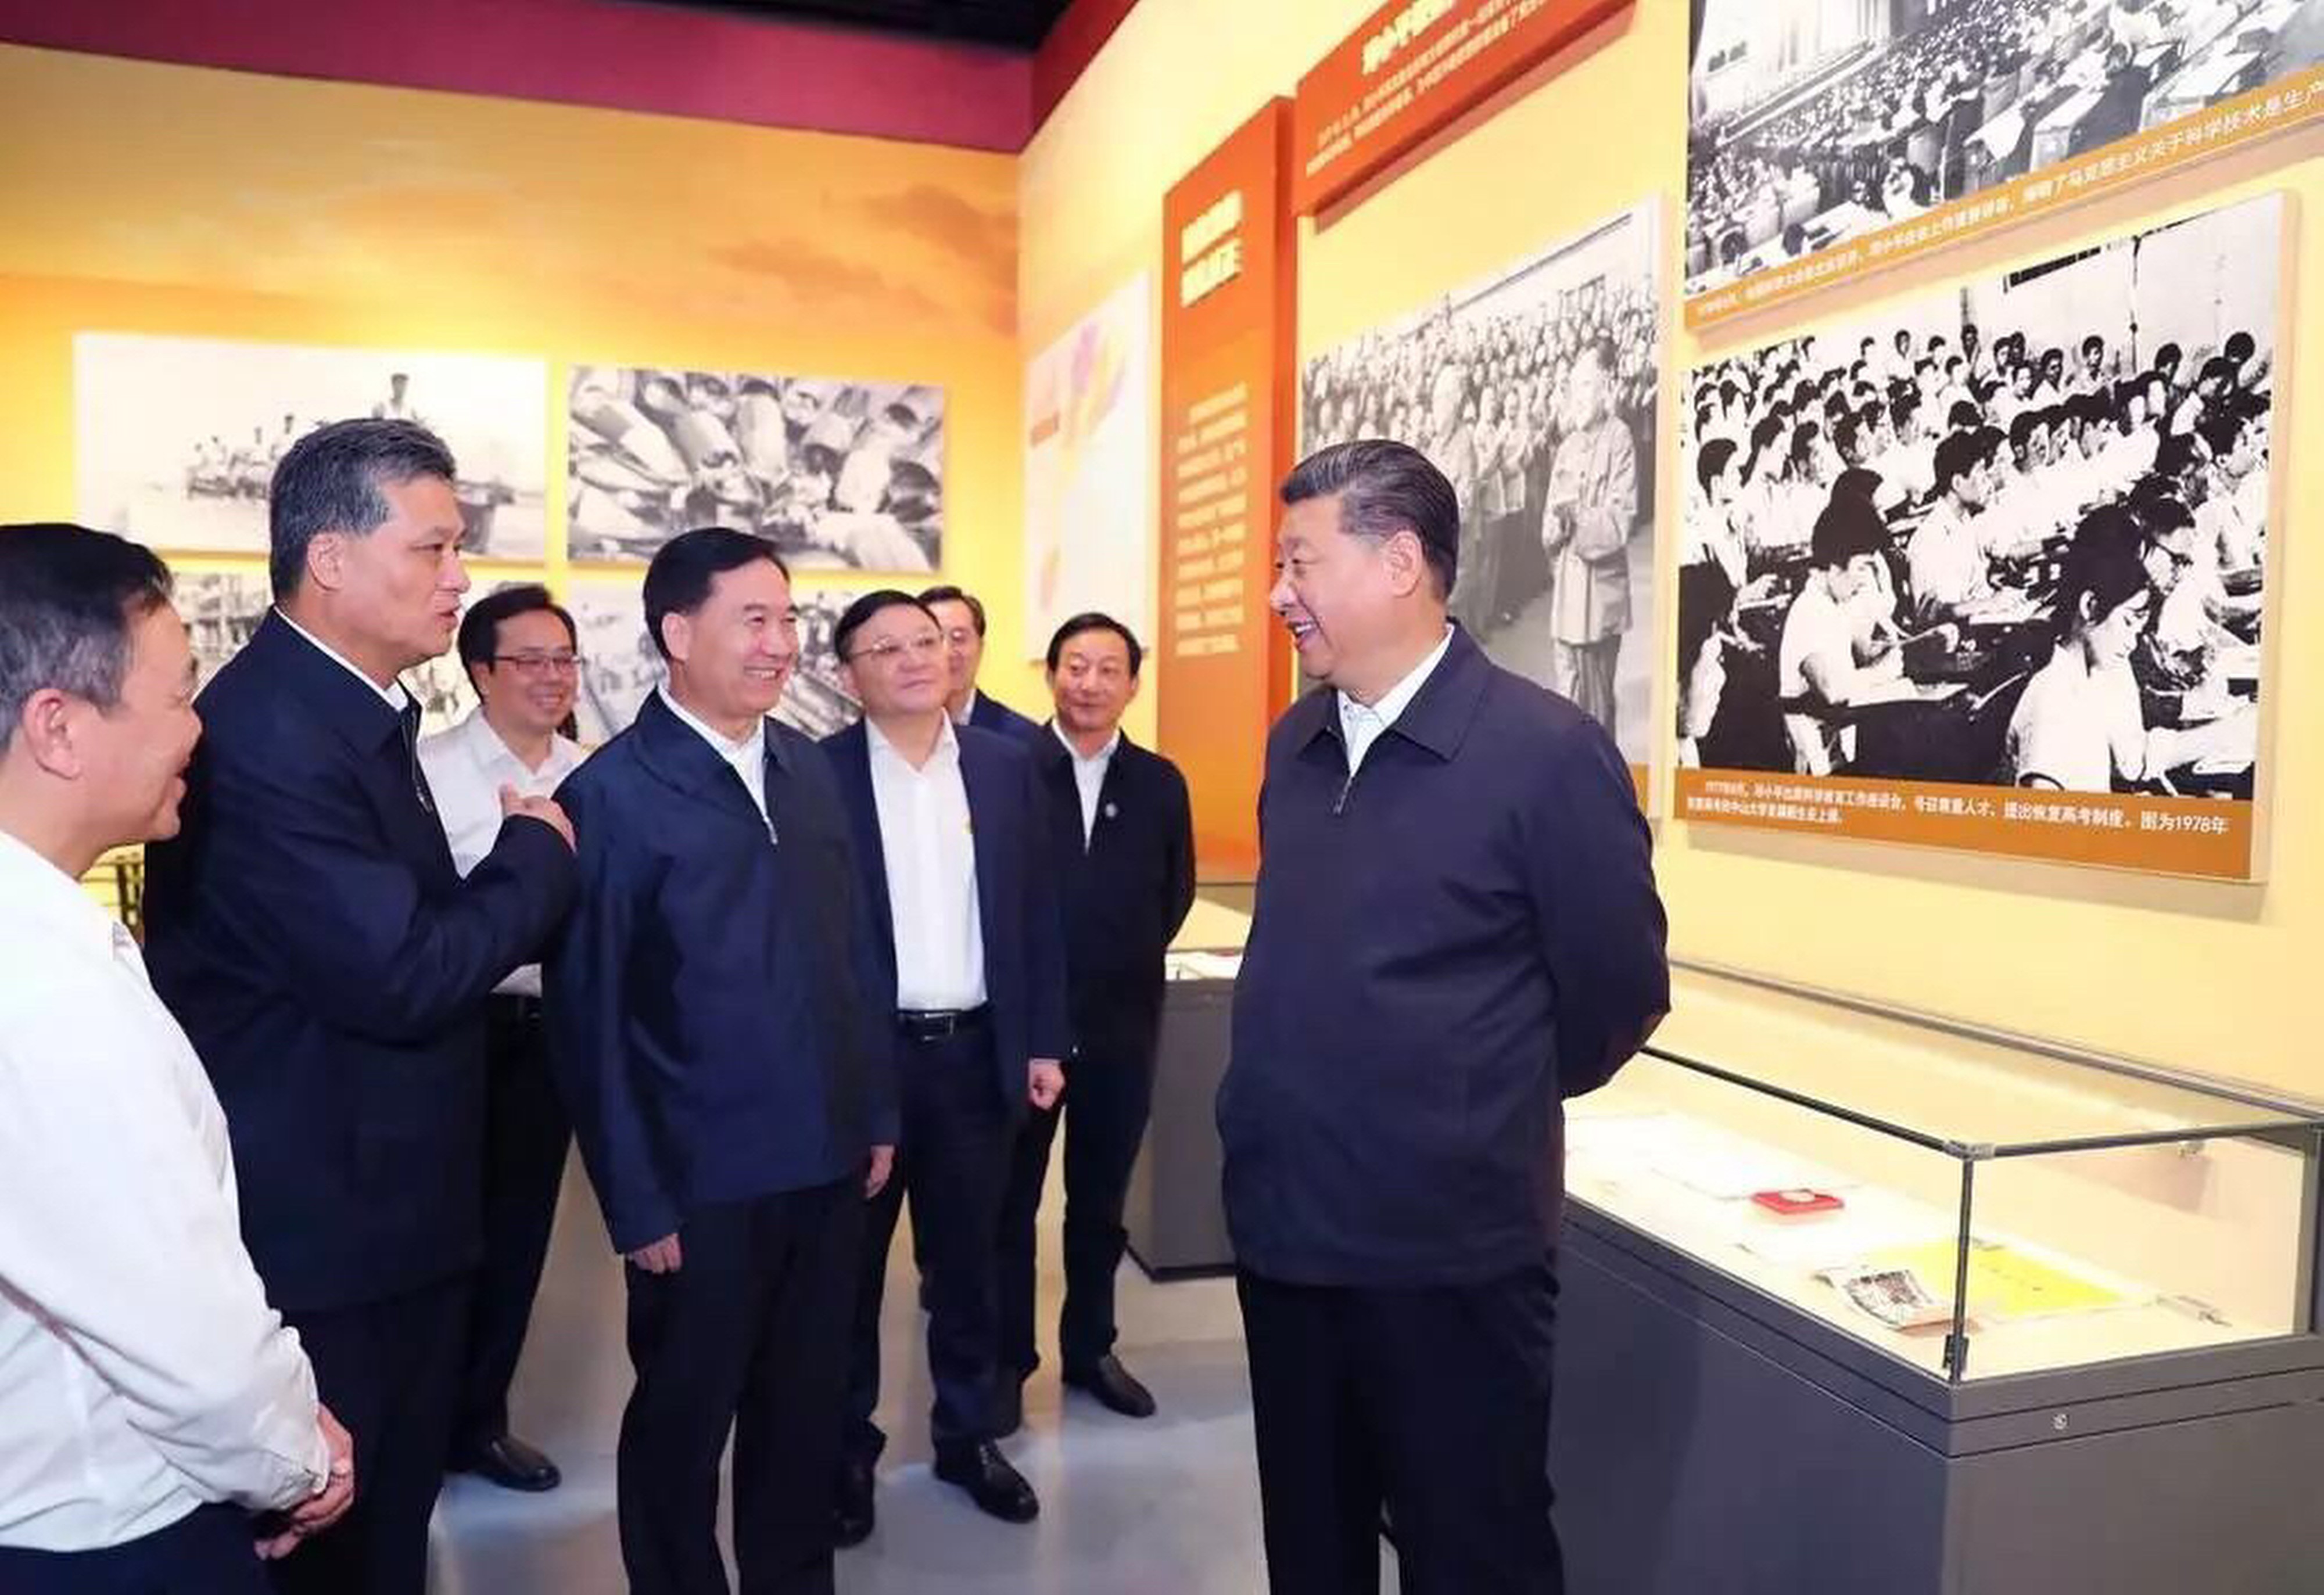 Chinese President Xi Jinping (right) visits an exhibition in Shenzhen on Guangdong’s leading role in reform and opening up 40 years ago. Source: People’s Daily